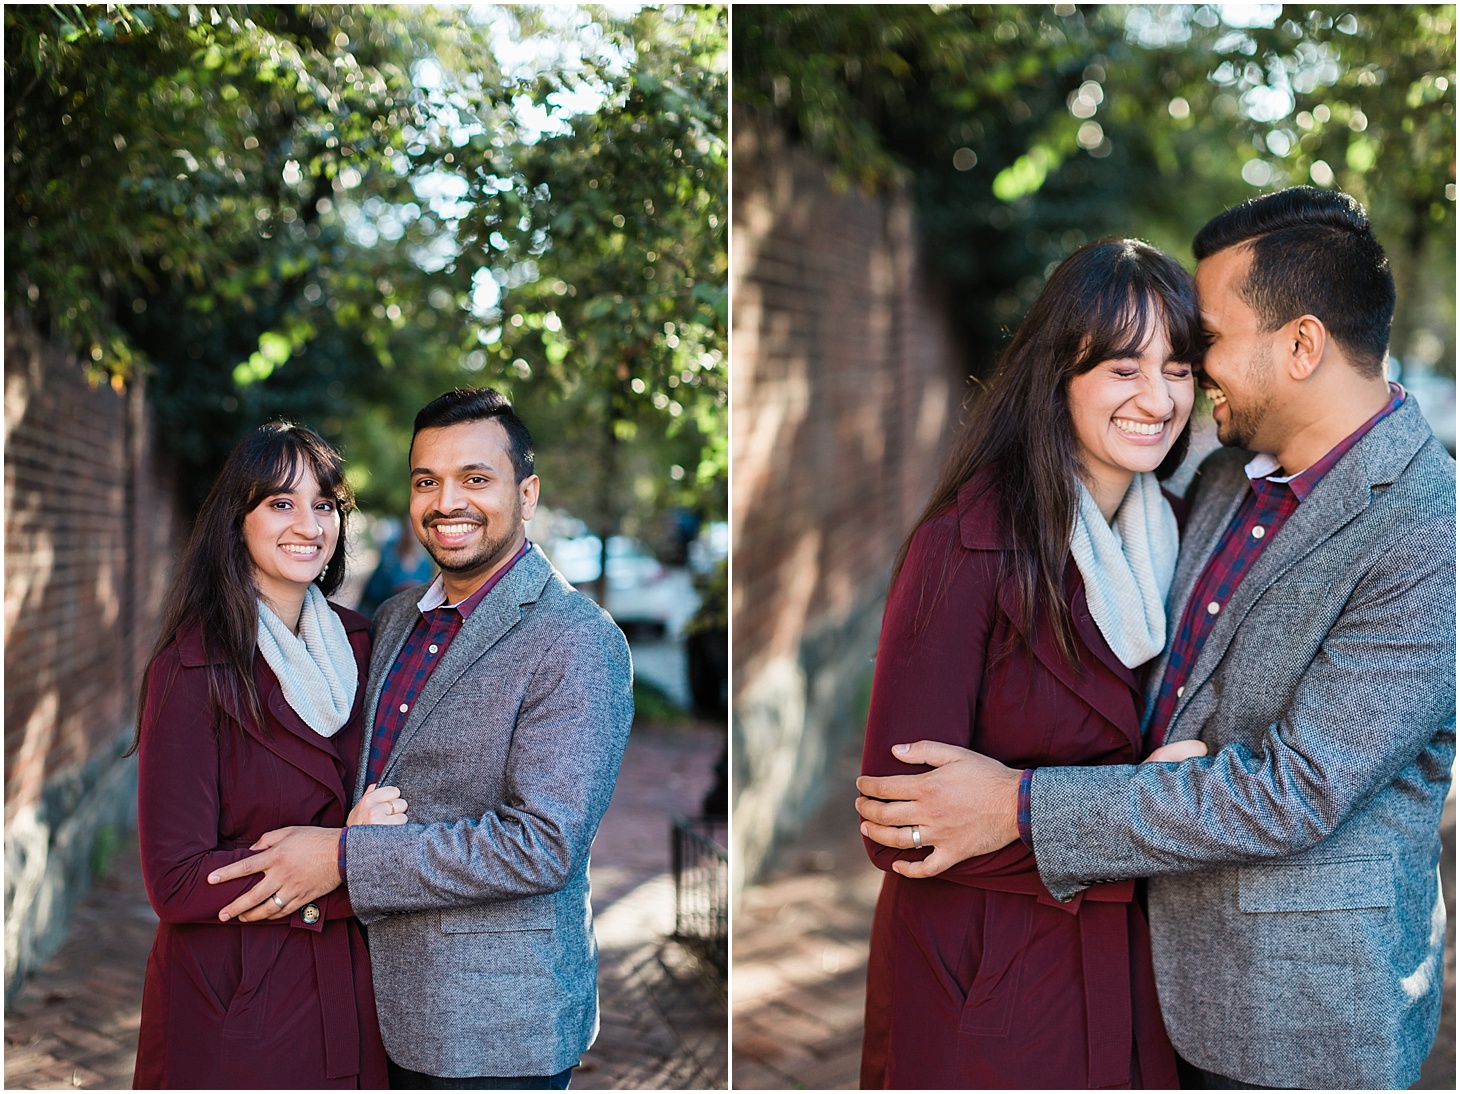 Morning Engagement Session in Georgetown | Colorful Fall Engagement Session in Georgetown | Sarah Bradshaw Photography